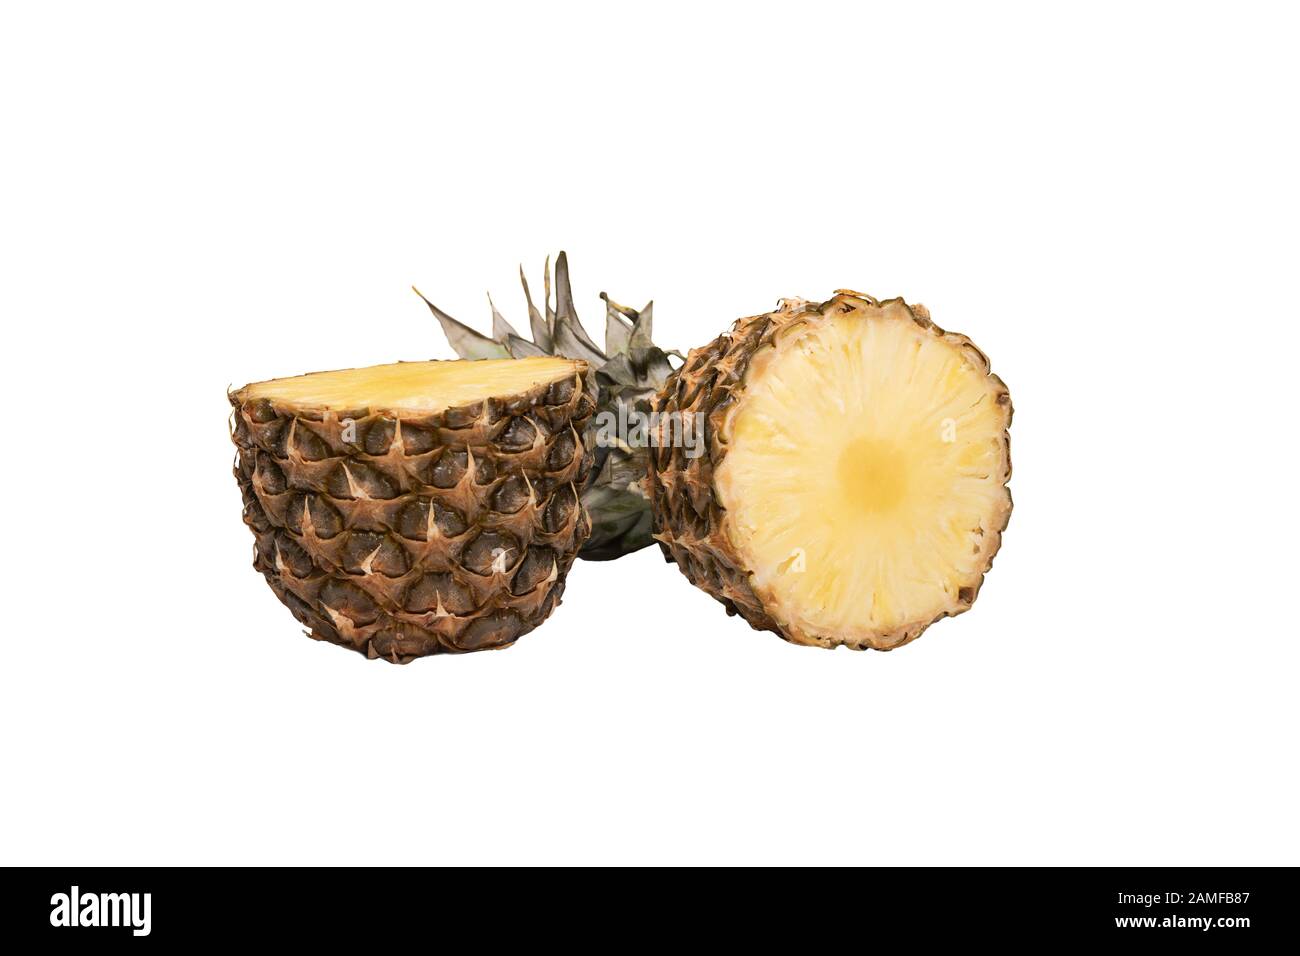 Pineapple half. Cut pineapple on white background. Pineapple isolated. Stock Photo